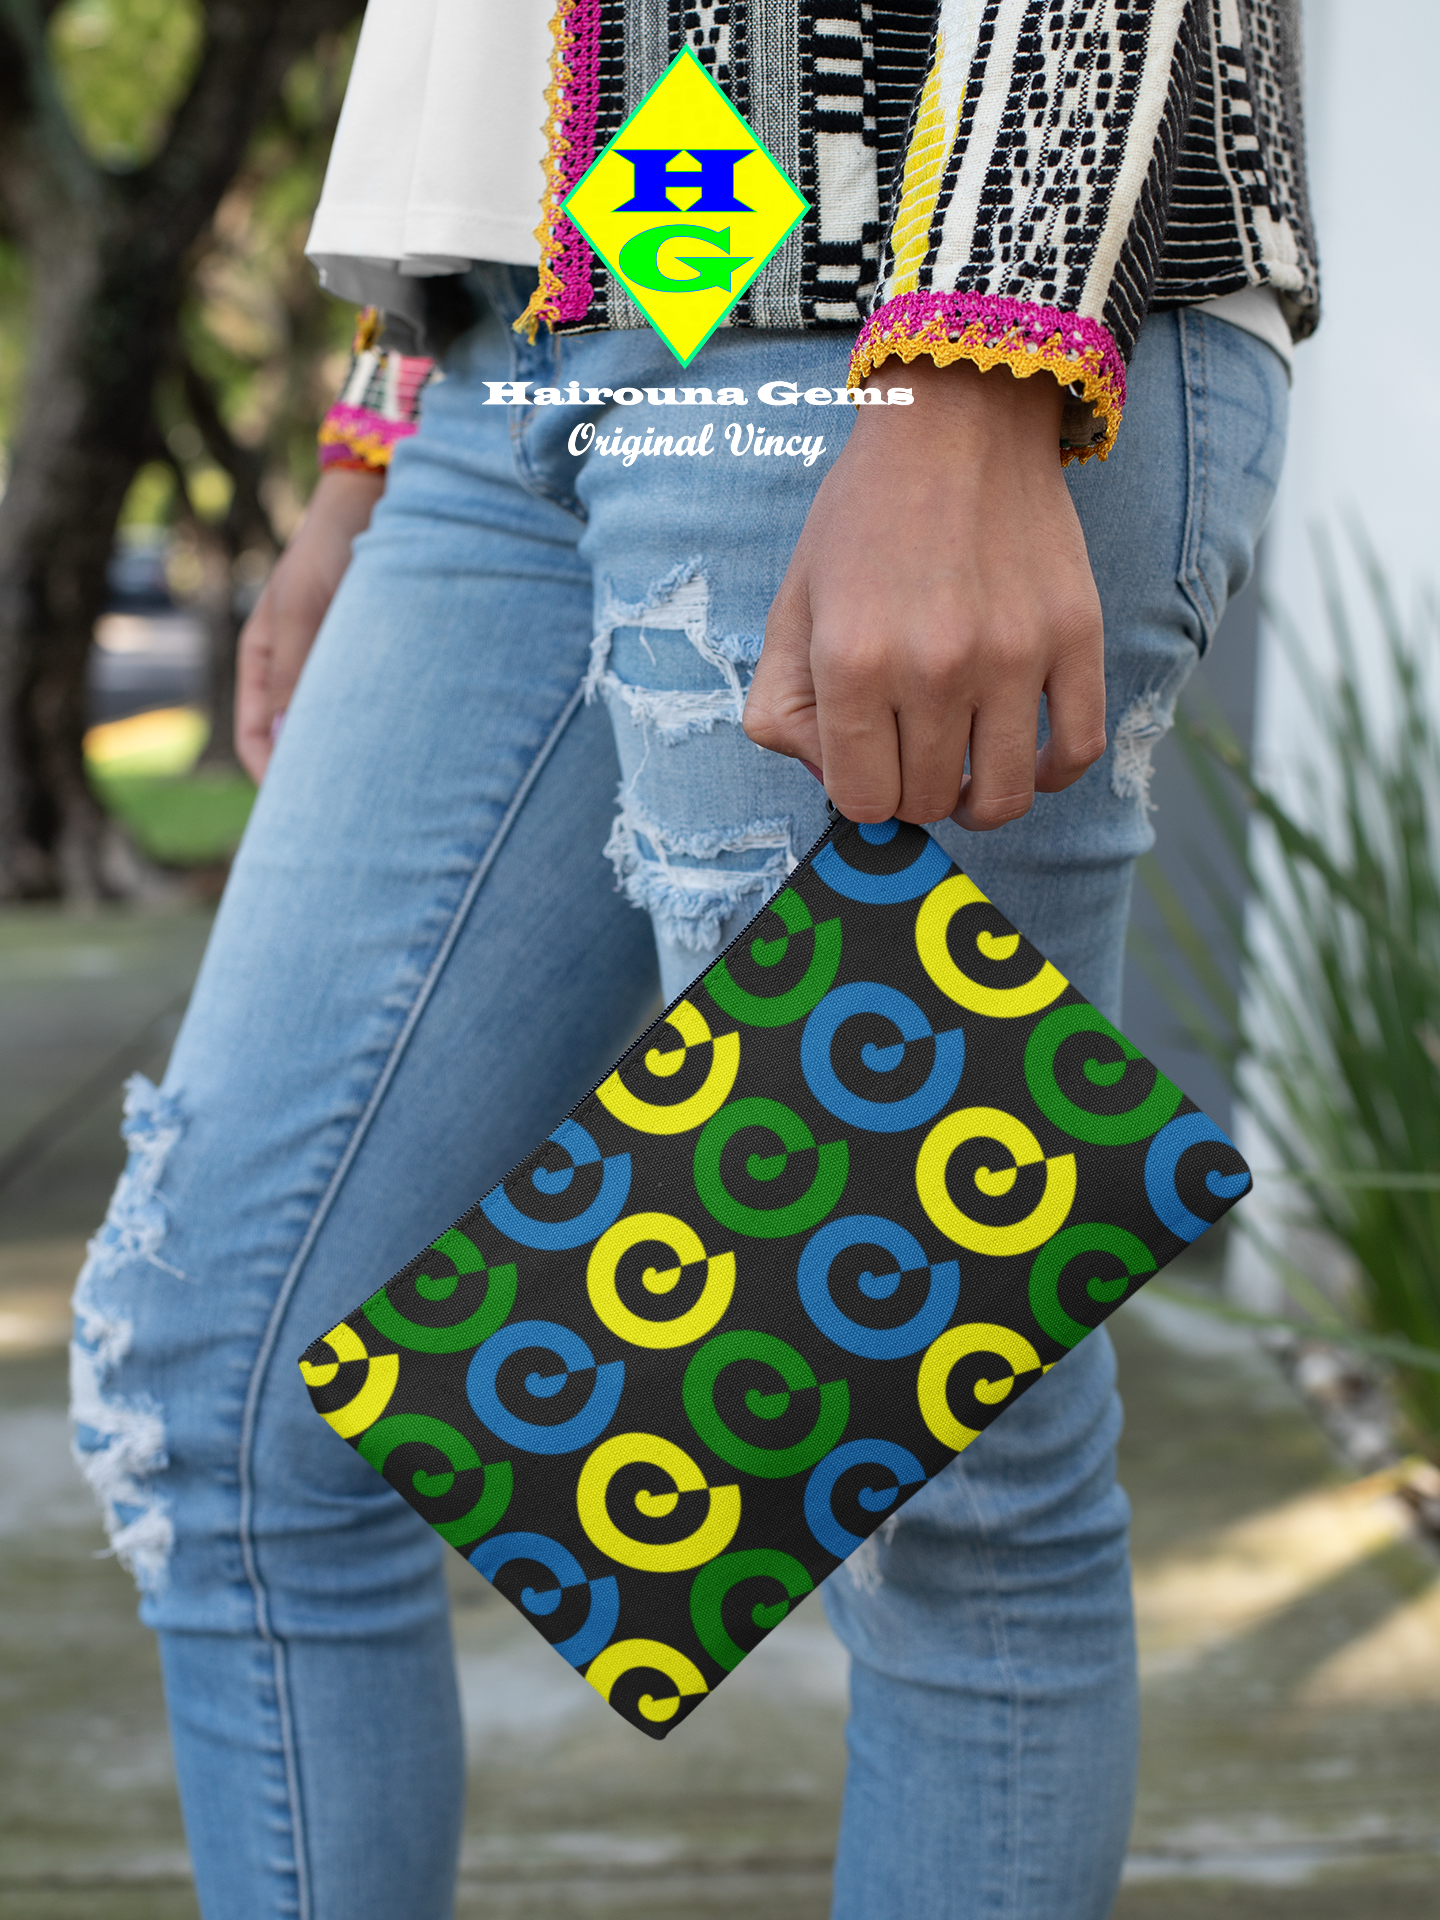 Black pouch with blue, yellow and green spirals being held by a woman on the street viewed from the waist down.